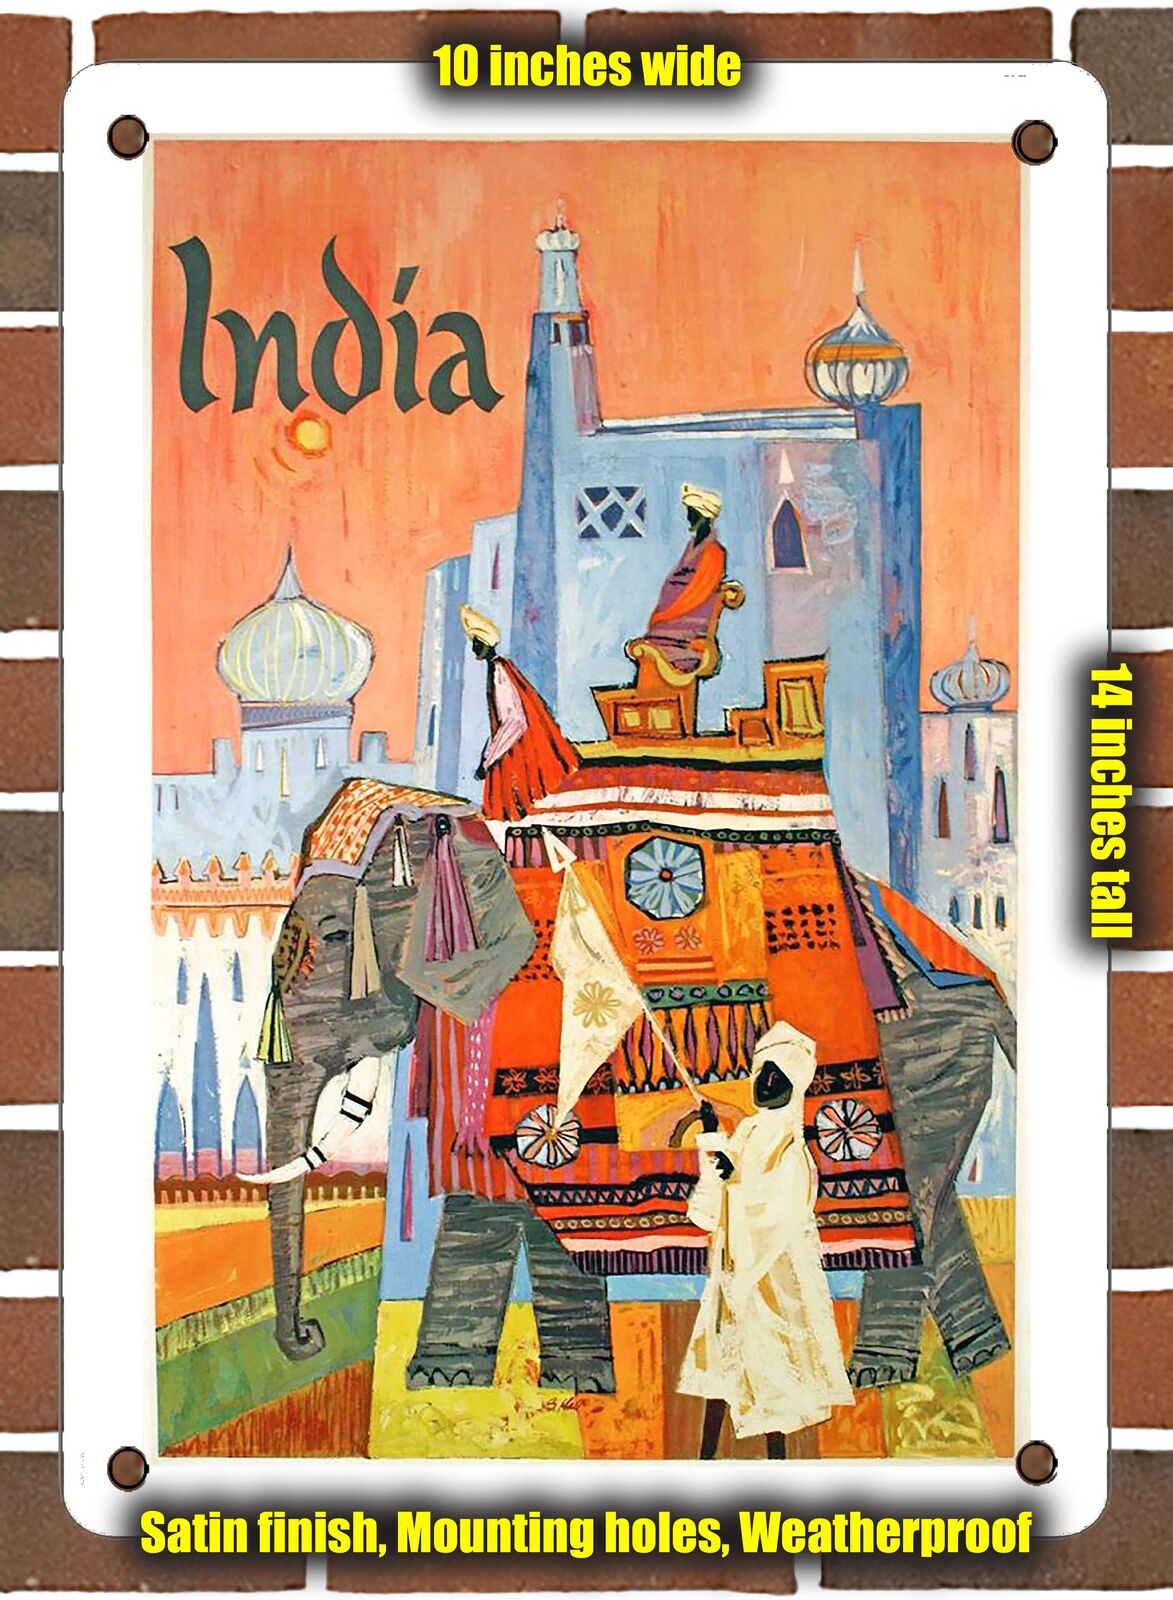 METAL SIGN - 1960 India - 10x14 Inches